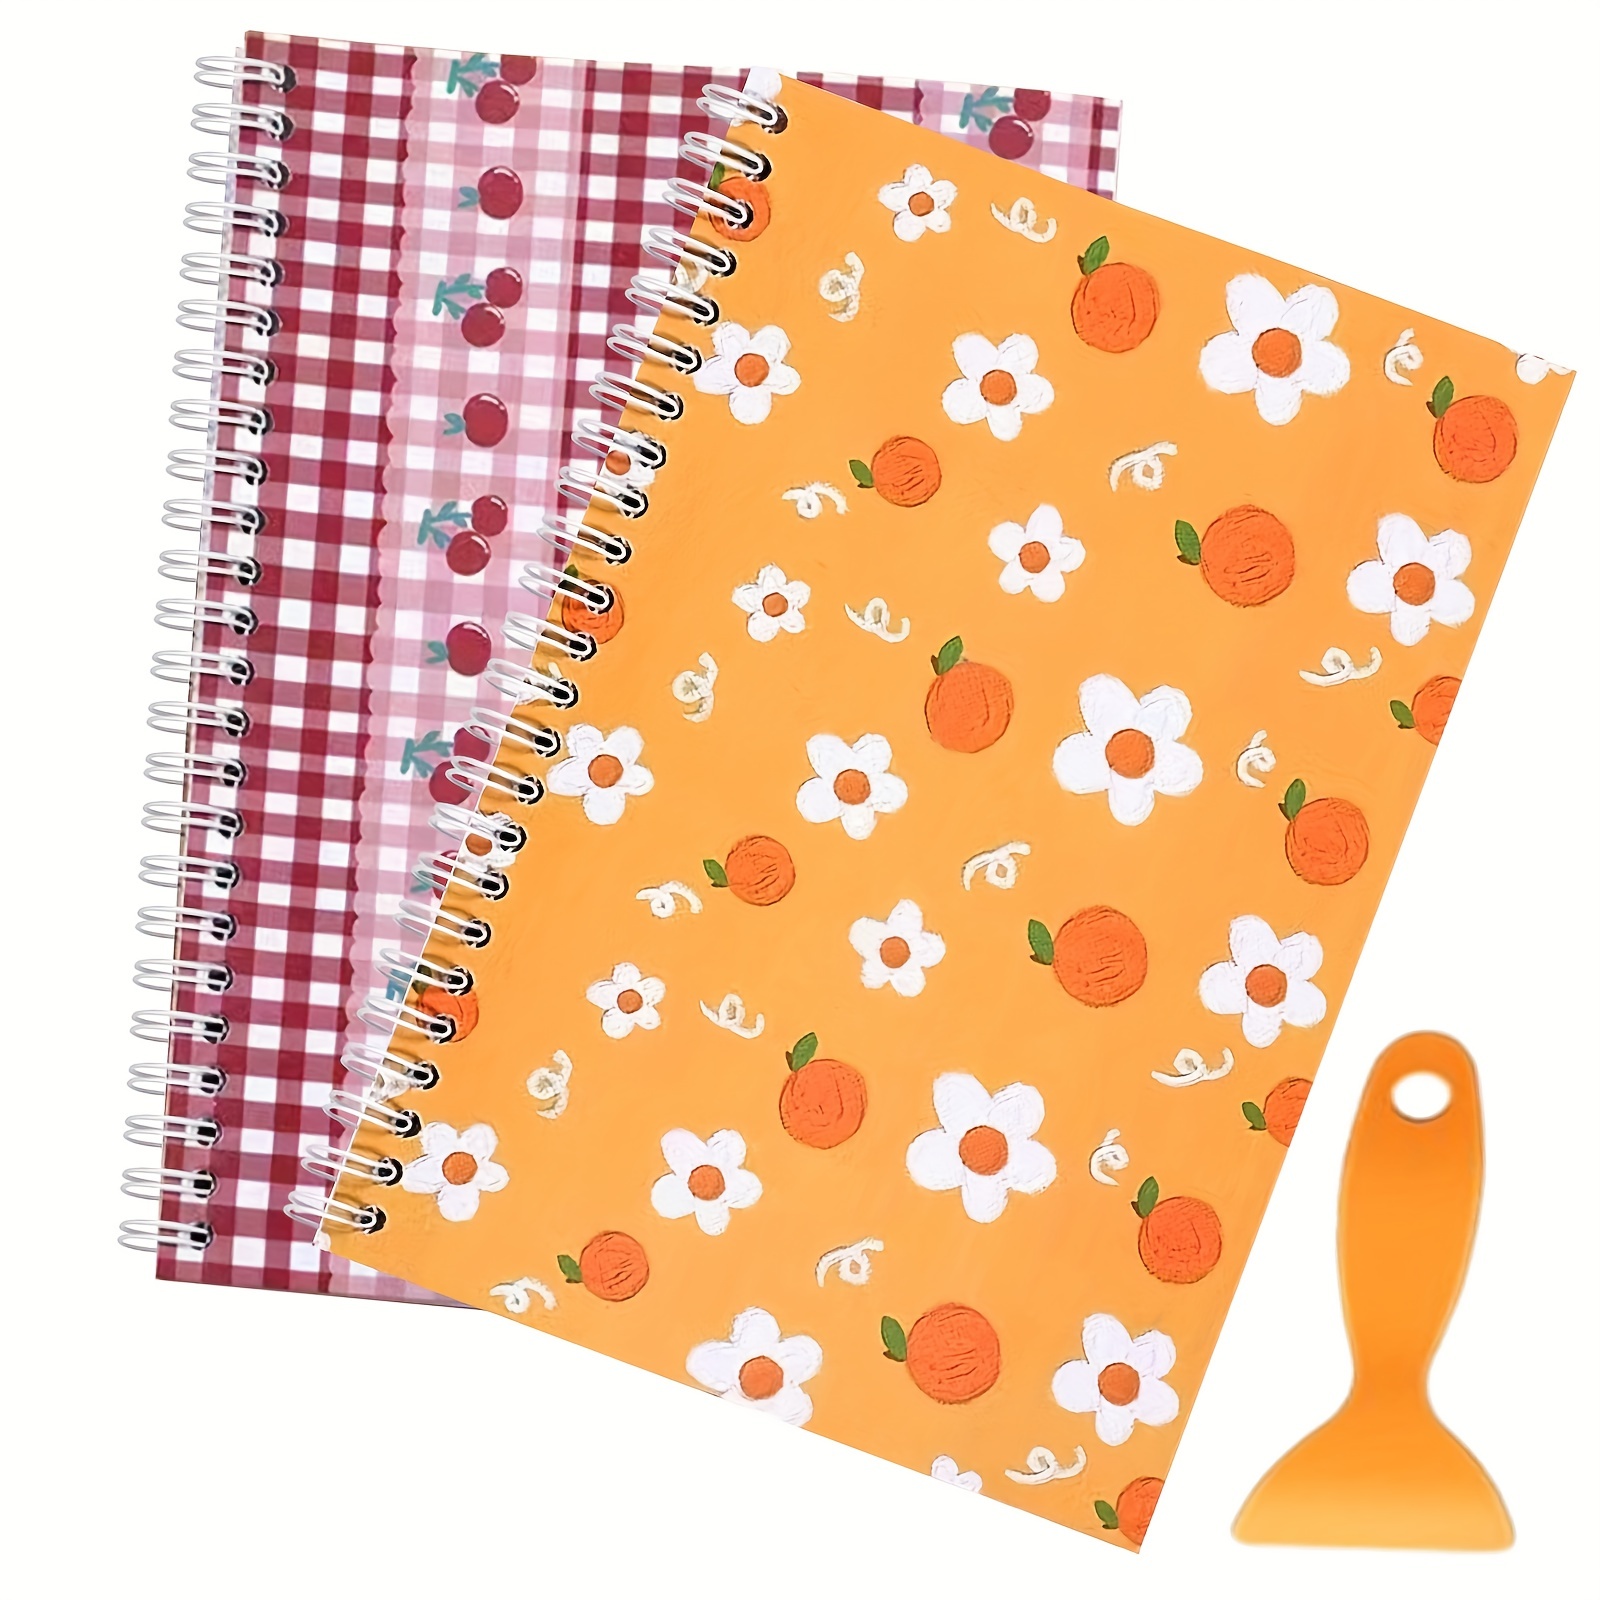 My Sticker Collecting Book Album: Blank sticker album for collecting  stickers with flowers cover | sticker collecting album for adults | large